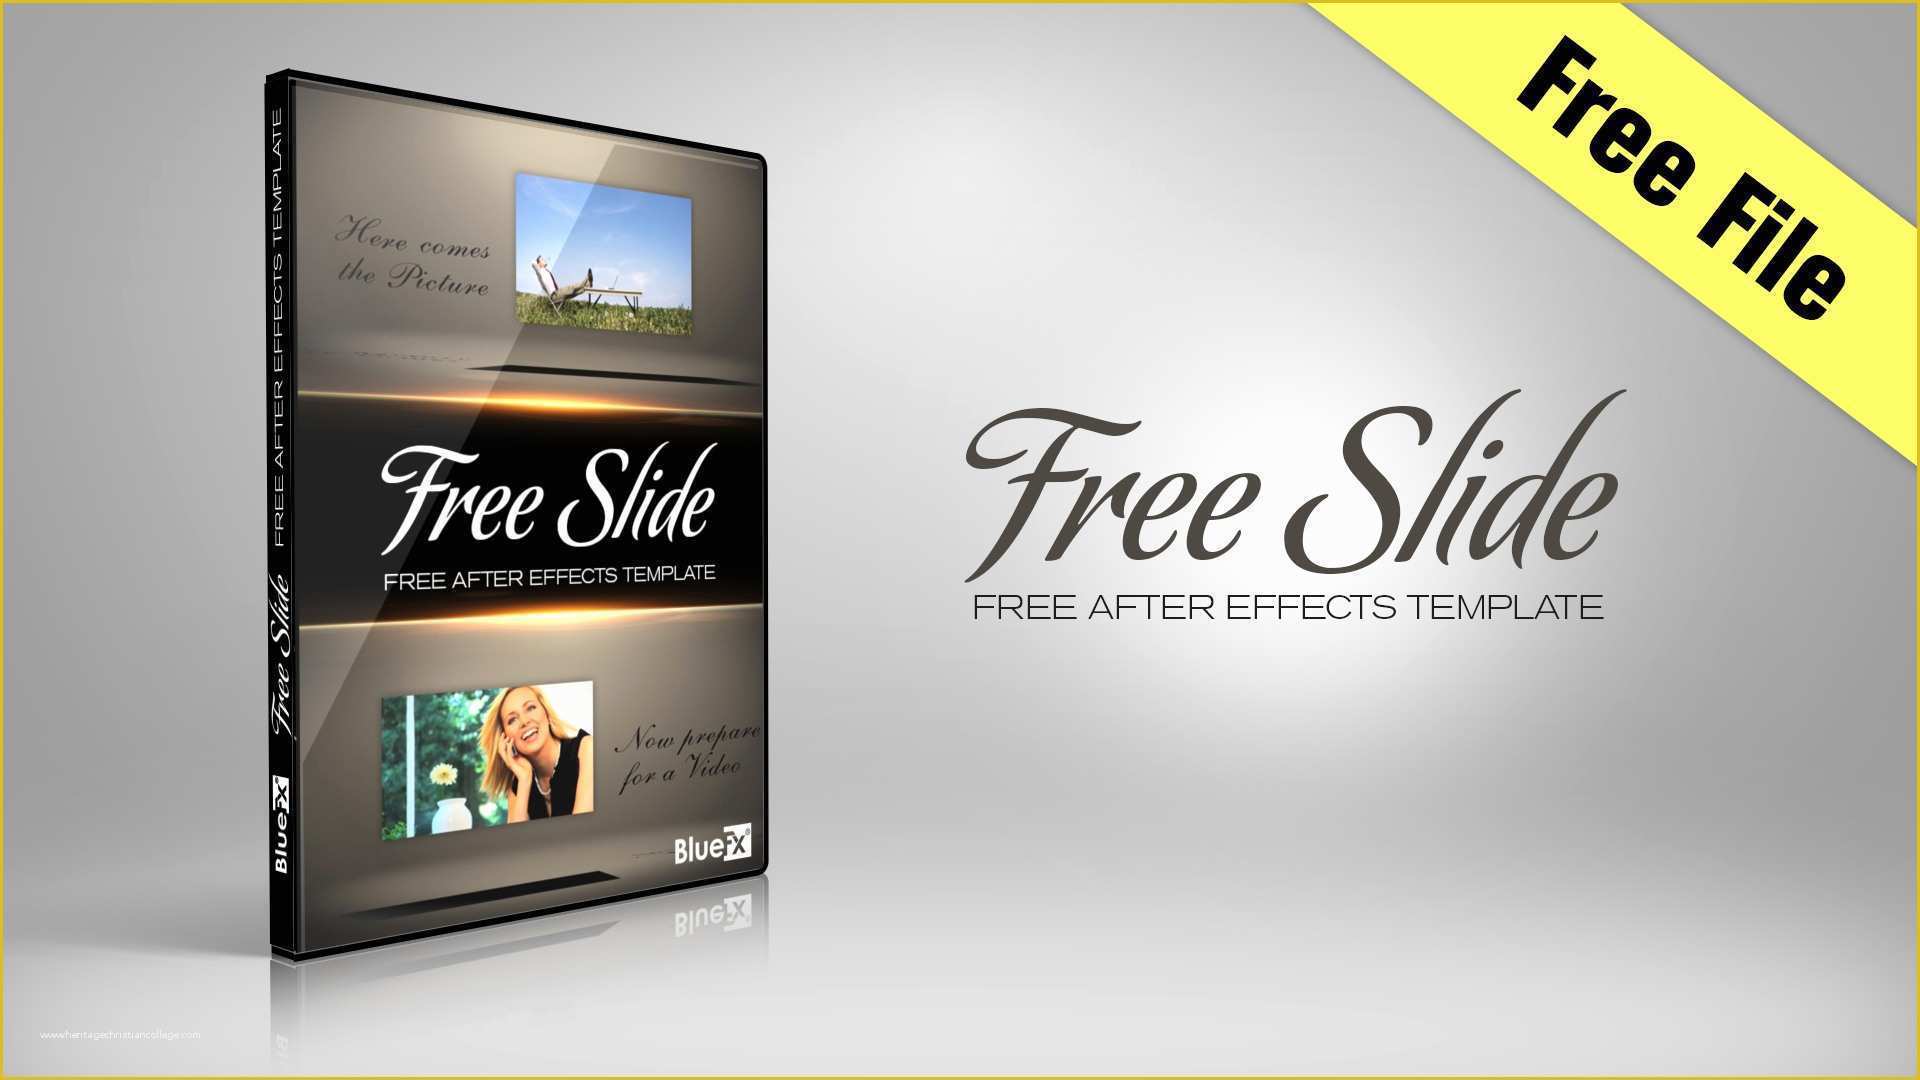 After Effects Video Presentation Template Free Download Of after Effects Slideshow Template Free